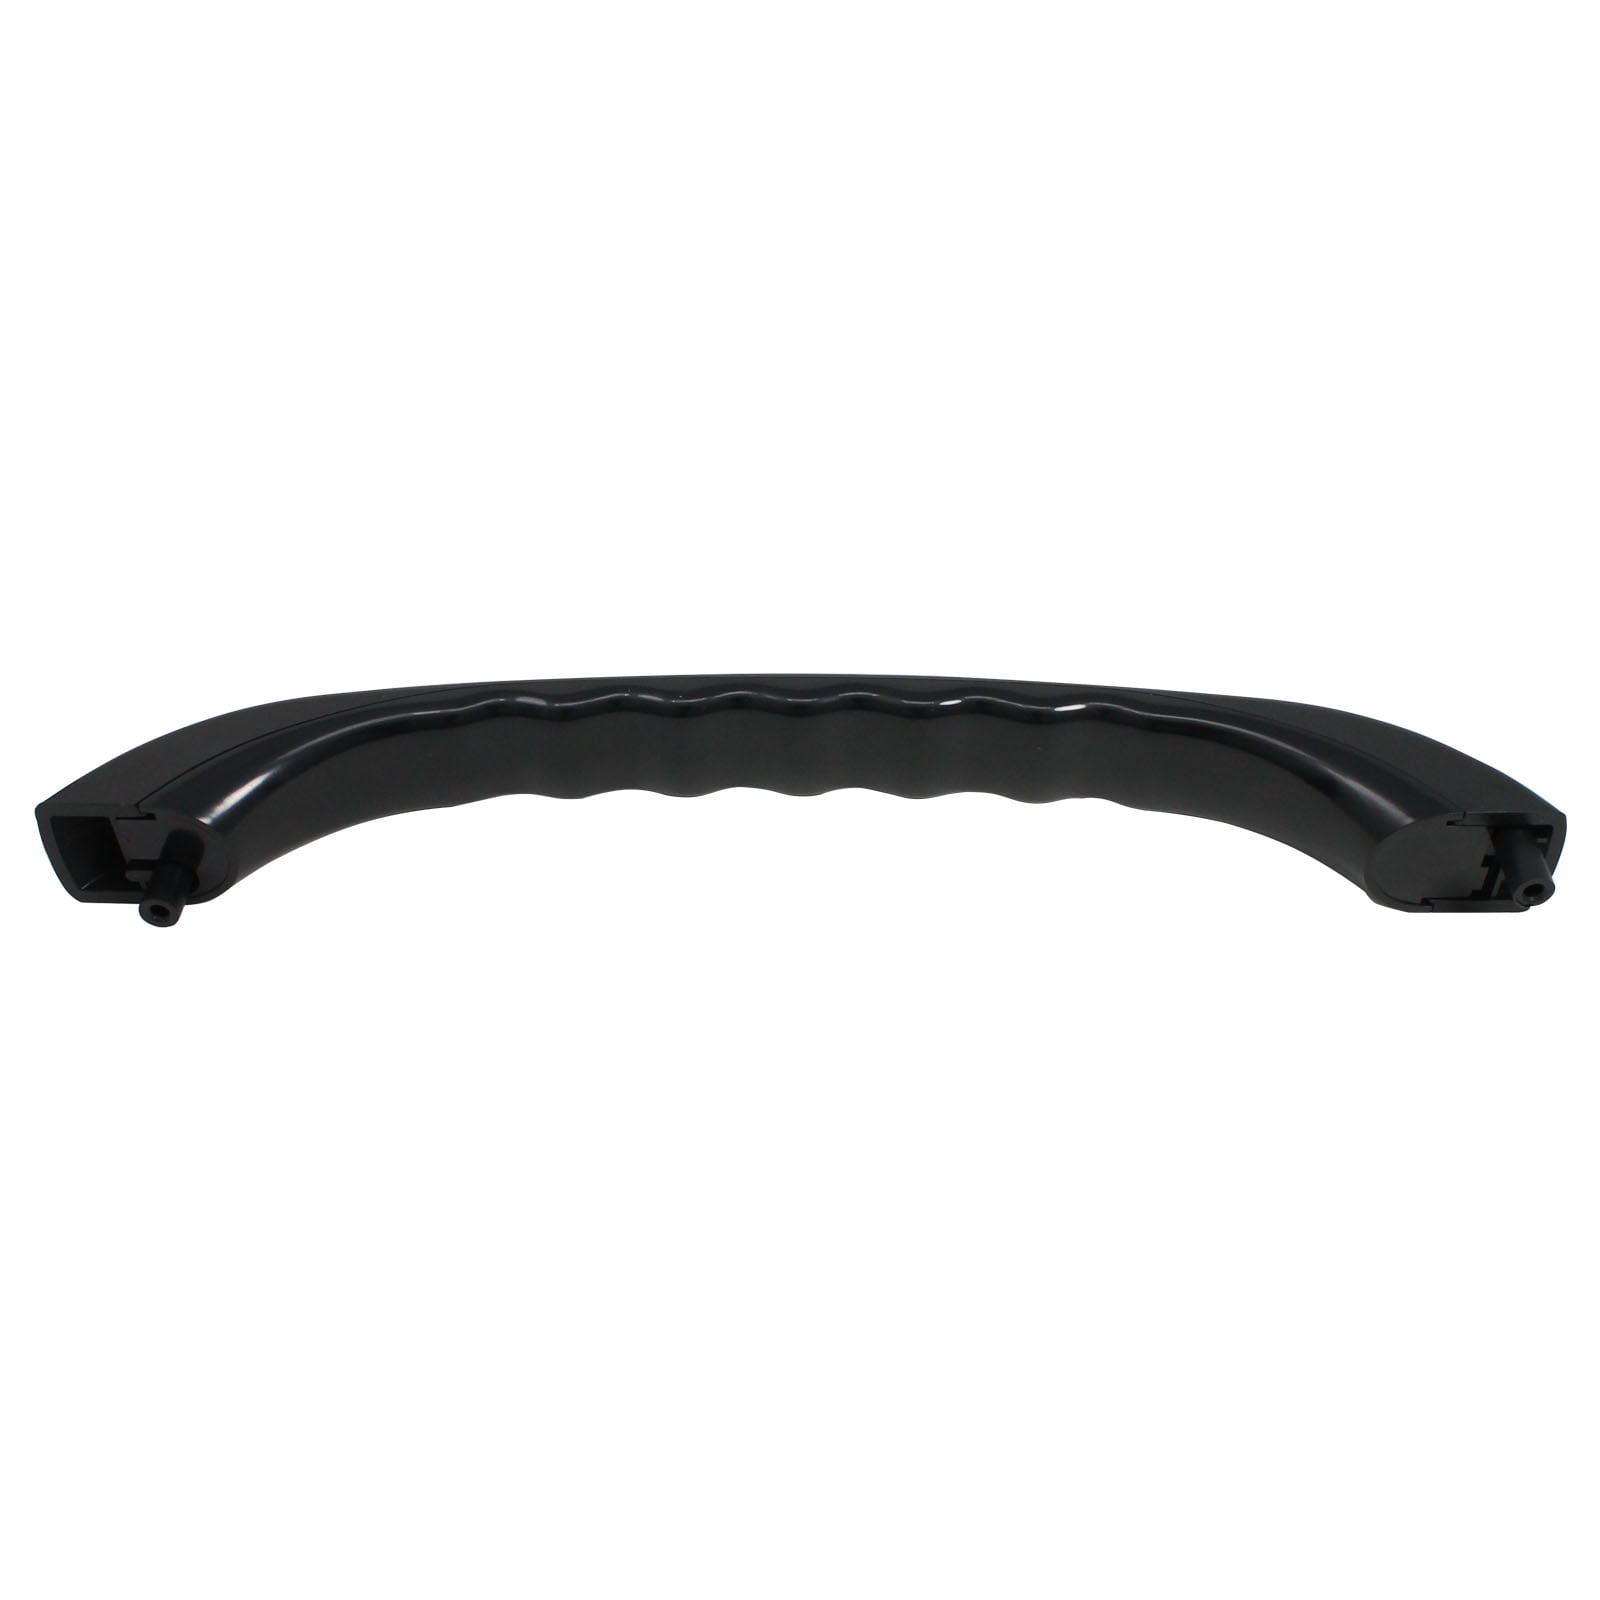 WB15X10020 Black Plastic Door Handle for Electric Microwave WB15X0334 